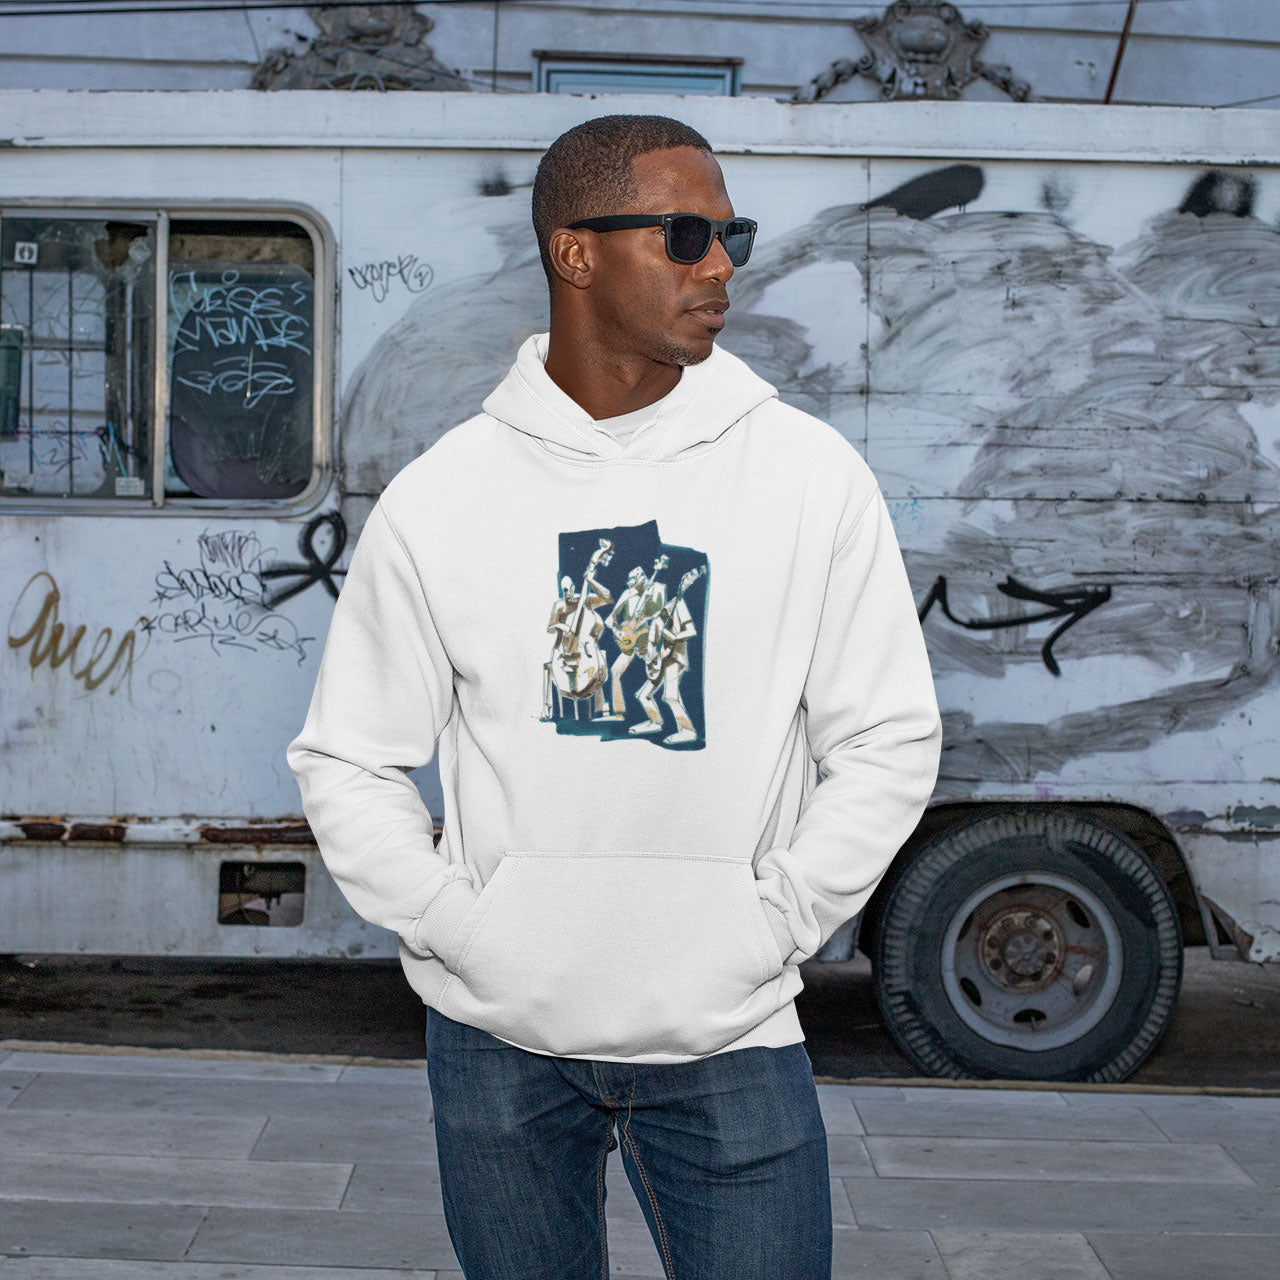 A man wearing a white hoodie with a Jazz trio print on the front